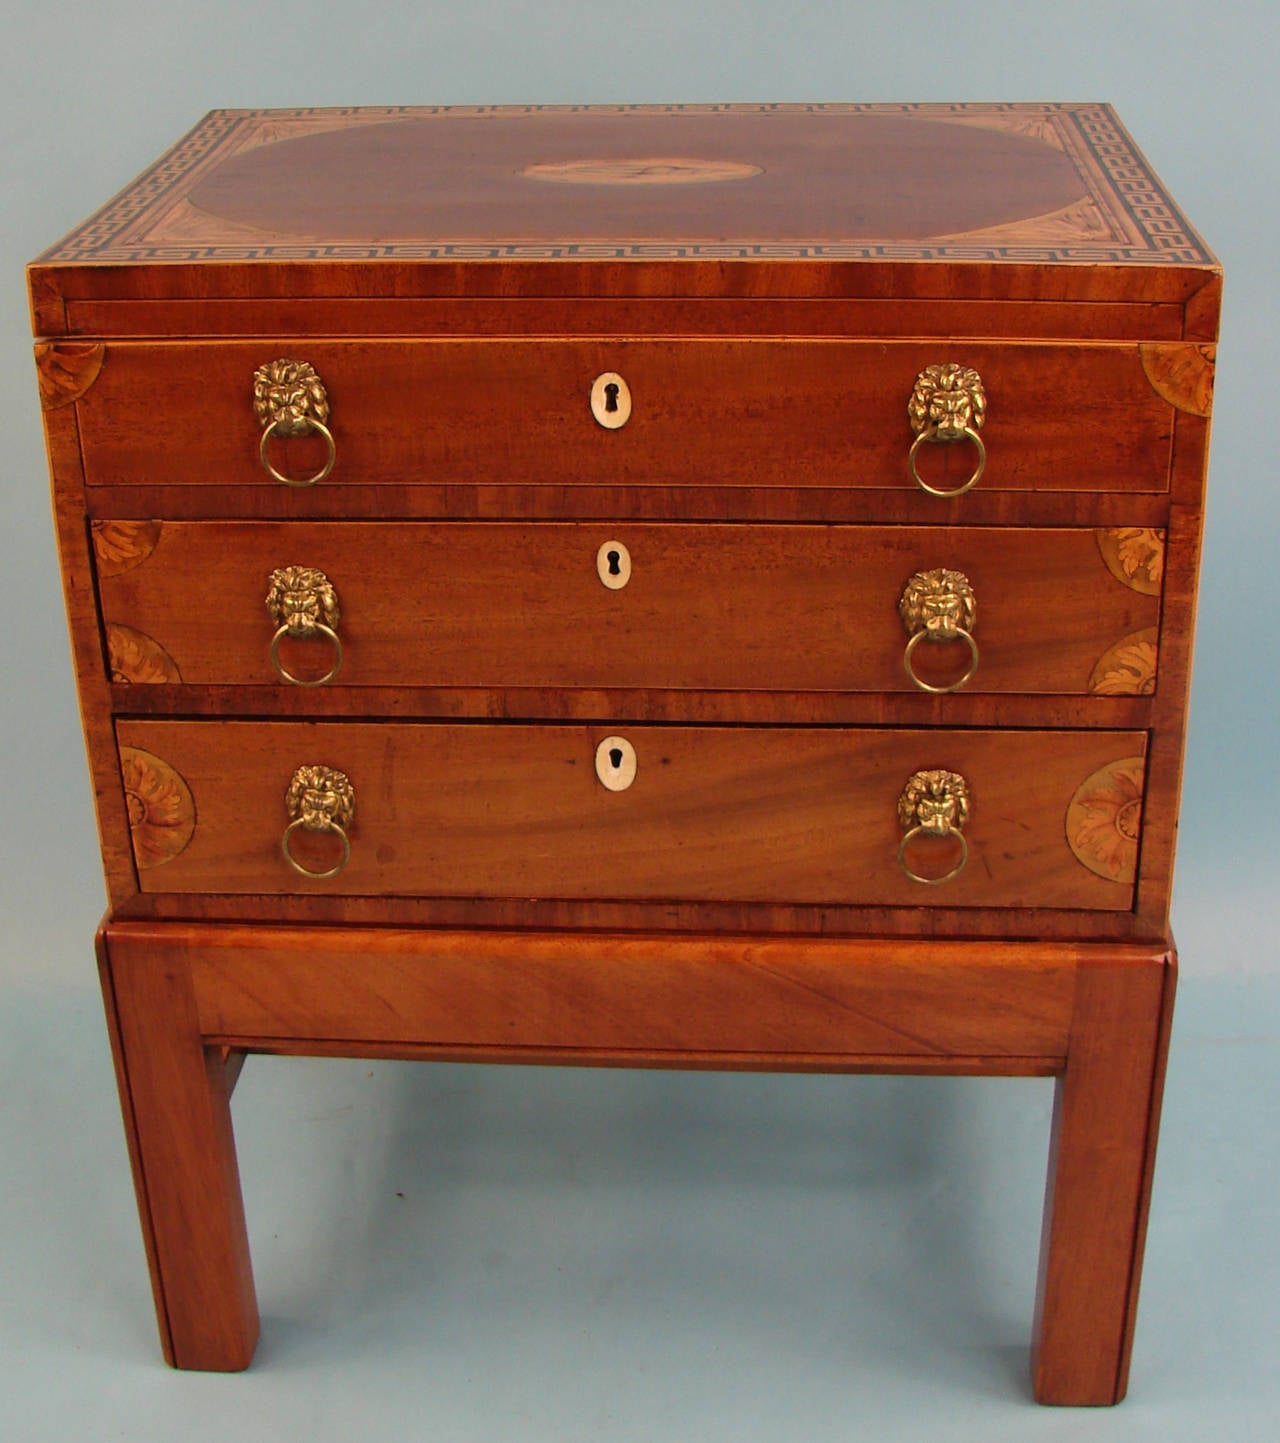 A fine quality George III mahogany combination work box and lap desk, the elaborately inlaid top with satinwood, ebony and boxwood inlay including a central conch shell and Greek key border, above one false and 2 functional inlaid graduated drawers,